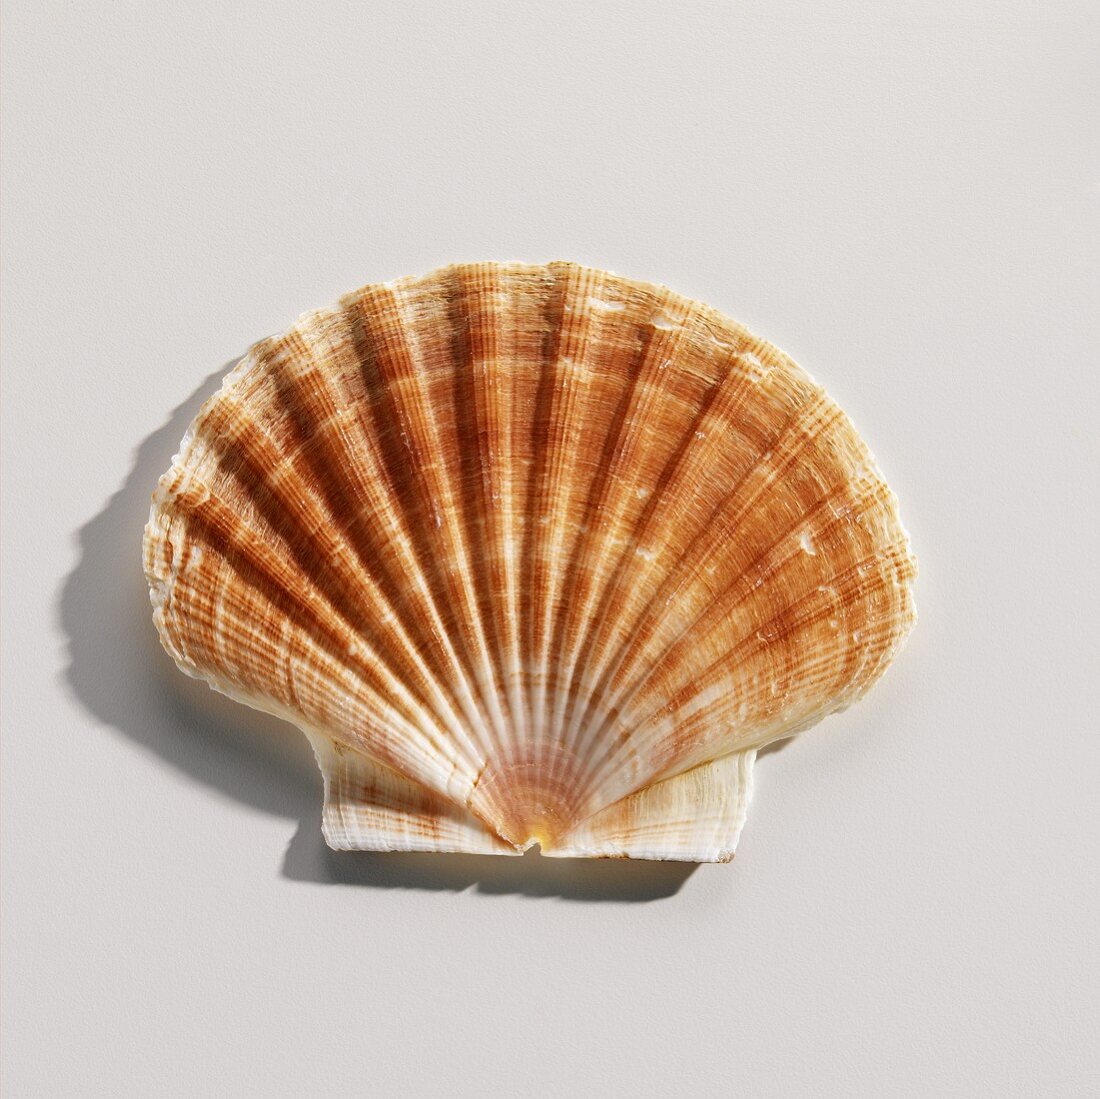 A Scallop Shell on White